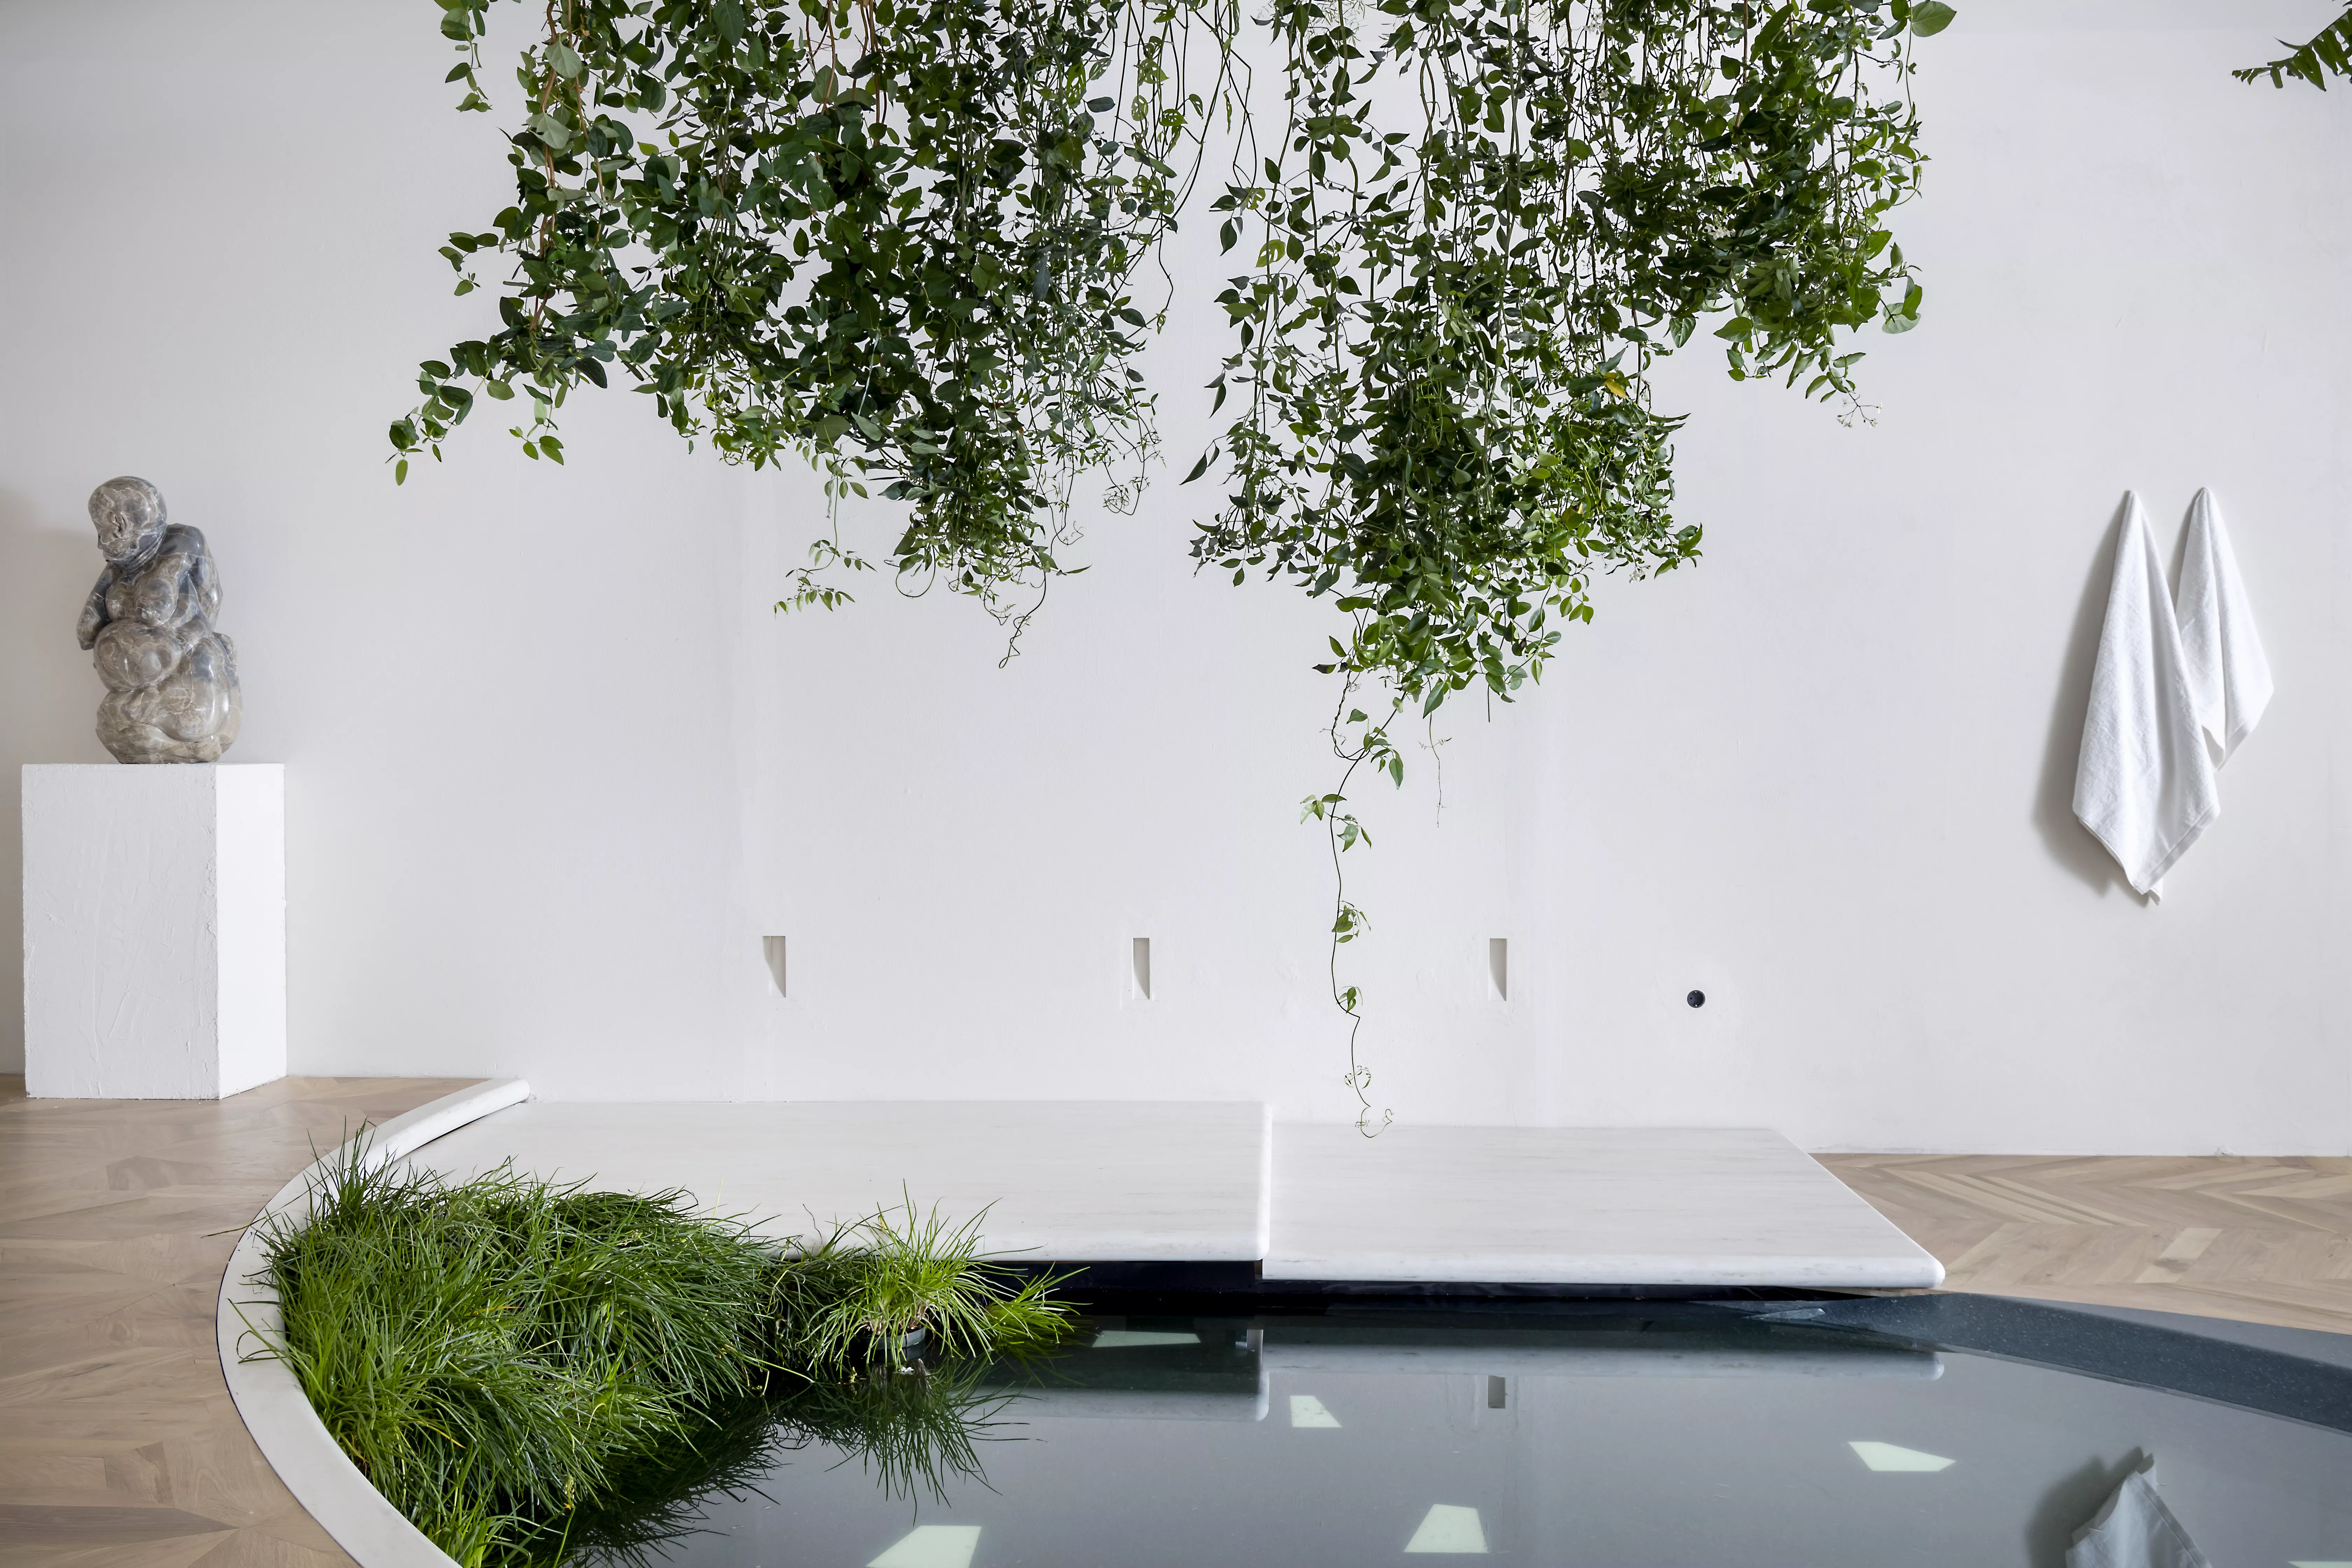 A HIMACS Oasis by Nothingstudio and Hüest  at Marbella Design & Art